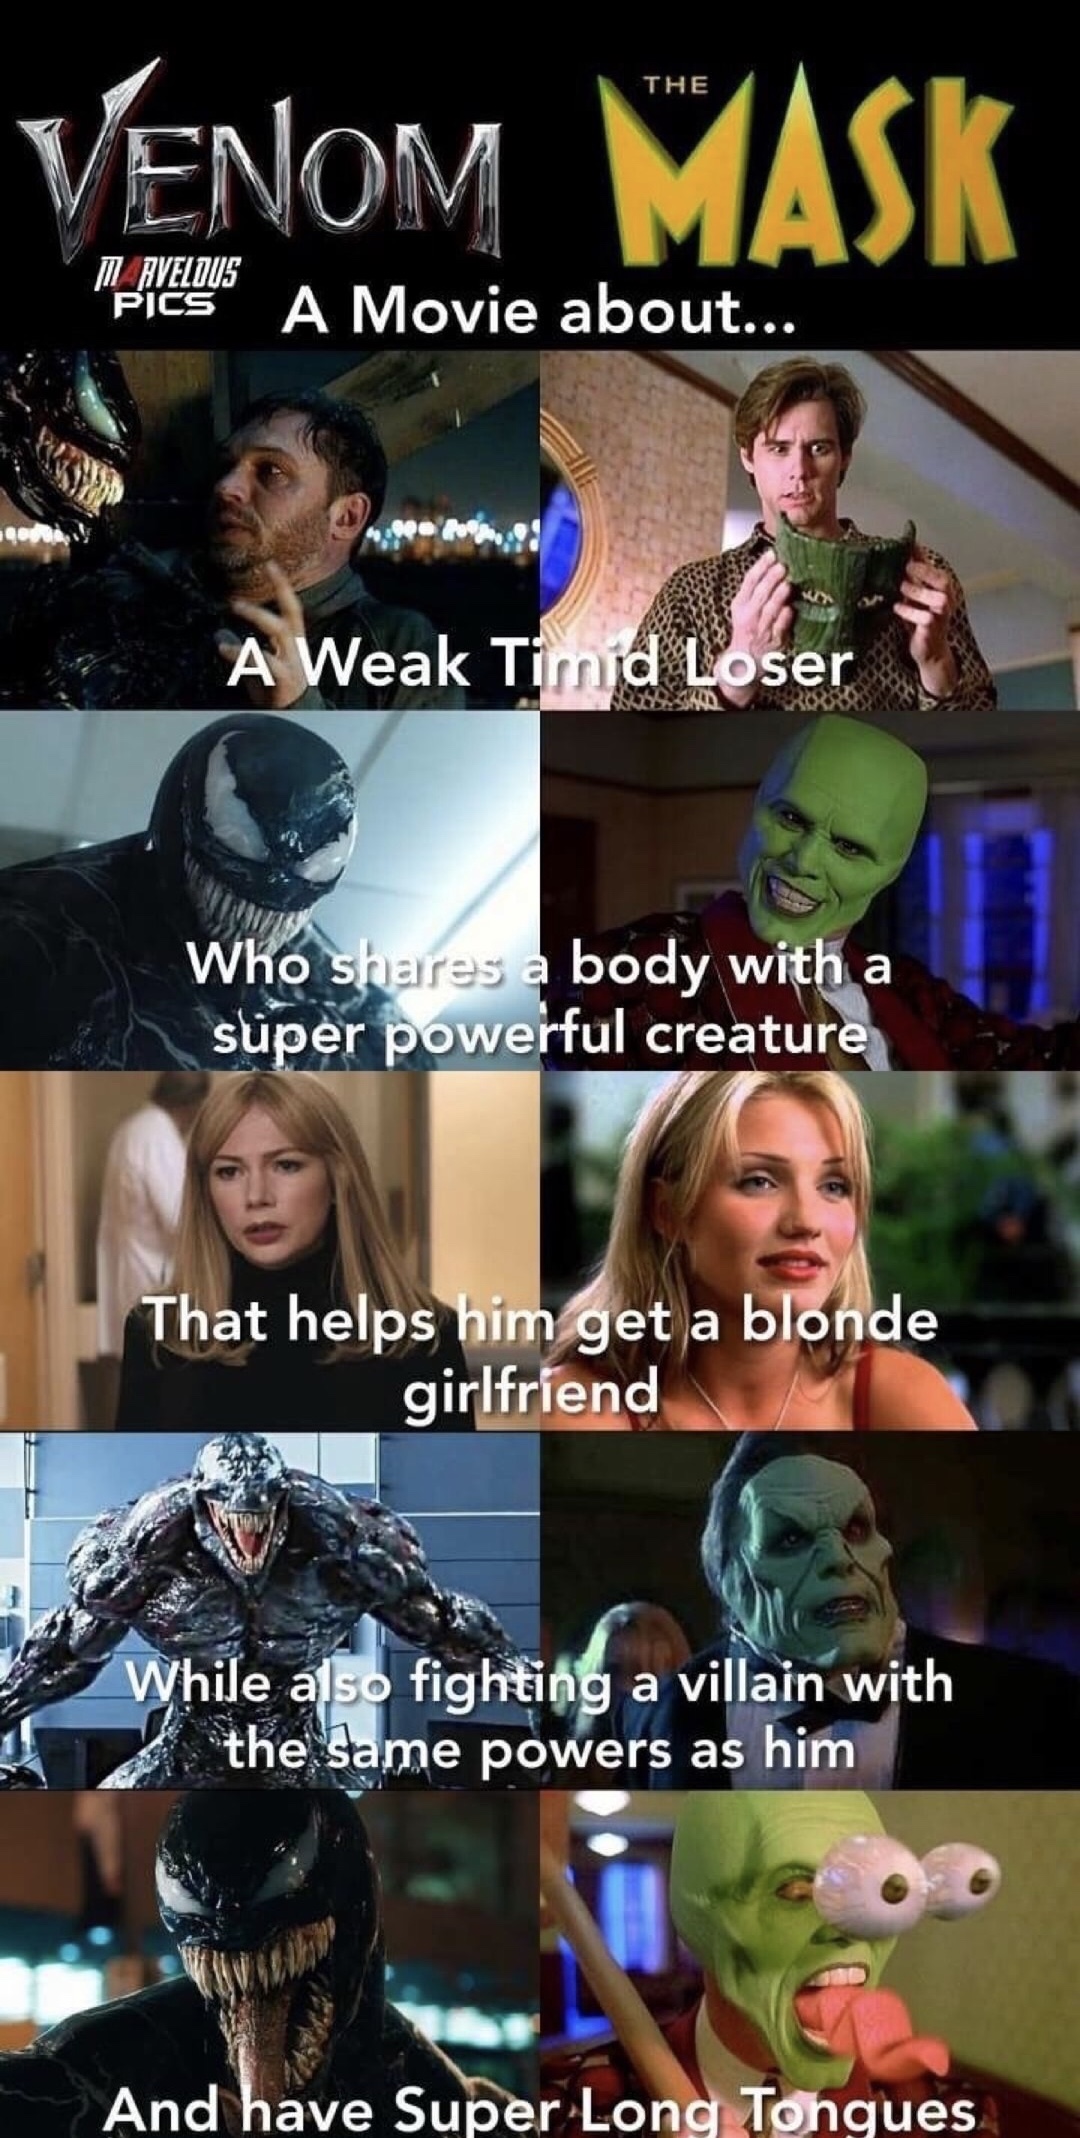 memes - nothing is original anymore - Venom Mask Pics A Movie about... A Weak Timd Loser Who e body with a super powerful creature That helps him get a blonde girlfriend While also fighting a villain with the same powers as him . And have Super Long Tonqu